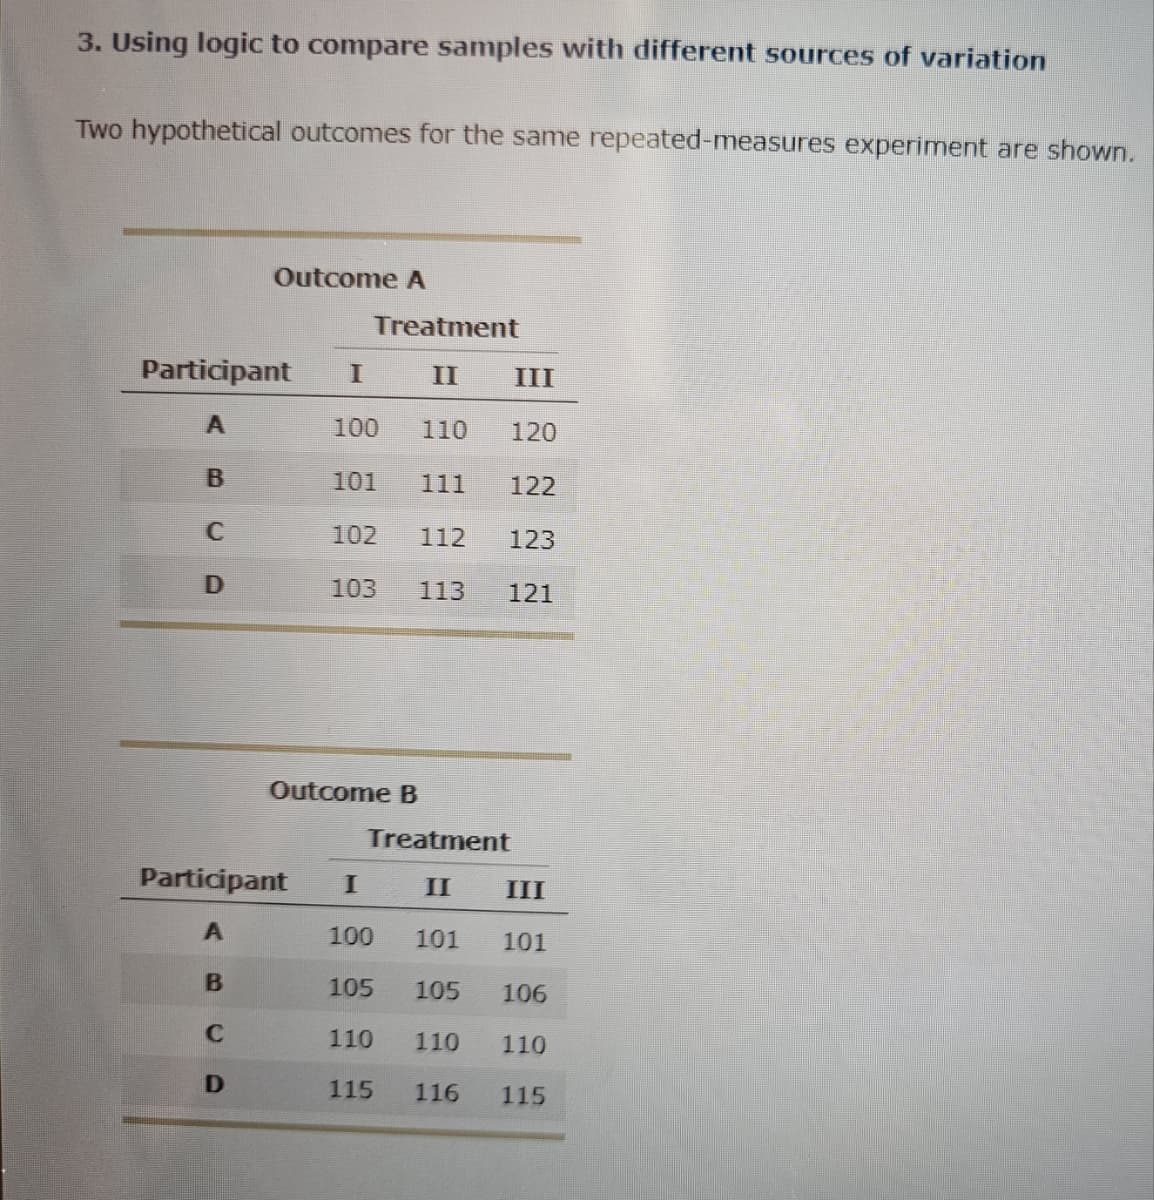 3. Using logic to compare samples with different sources of variation
Two hypothetical outcomes for the same repeated-measures experiment are shown.
Participant I
A
B
C
D
Outcome A
B
C
D
Treatment
II
III
100 110 120
101 111
Participant I
A
102
103 113
Outcome B
122
112 123
121
Treatment
II
105
100 101 101
105 106
110
115
III
110 110
115
116